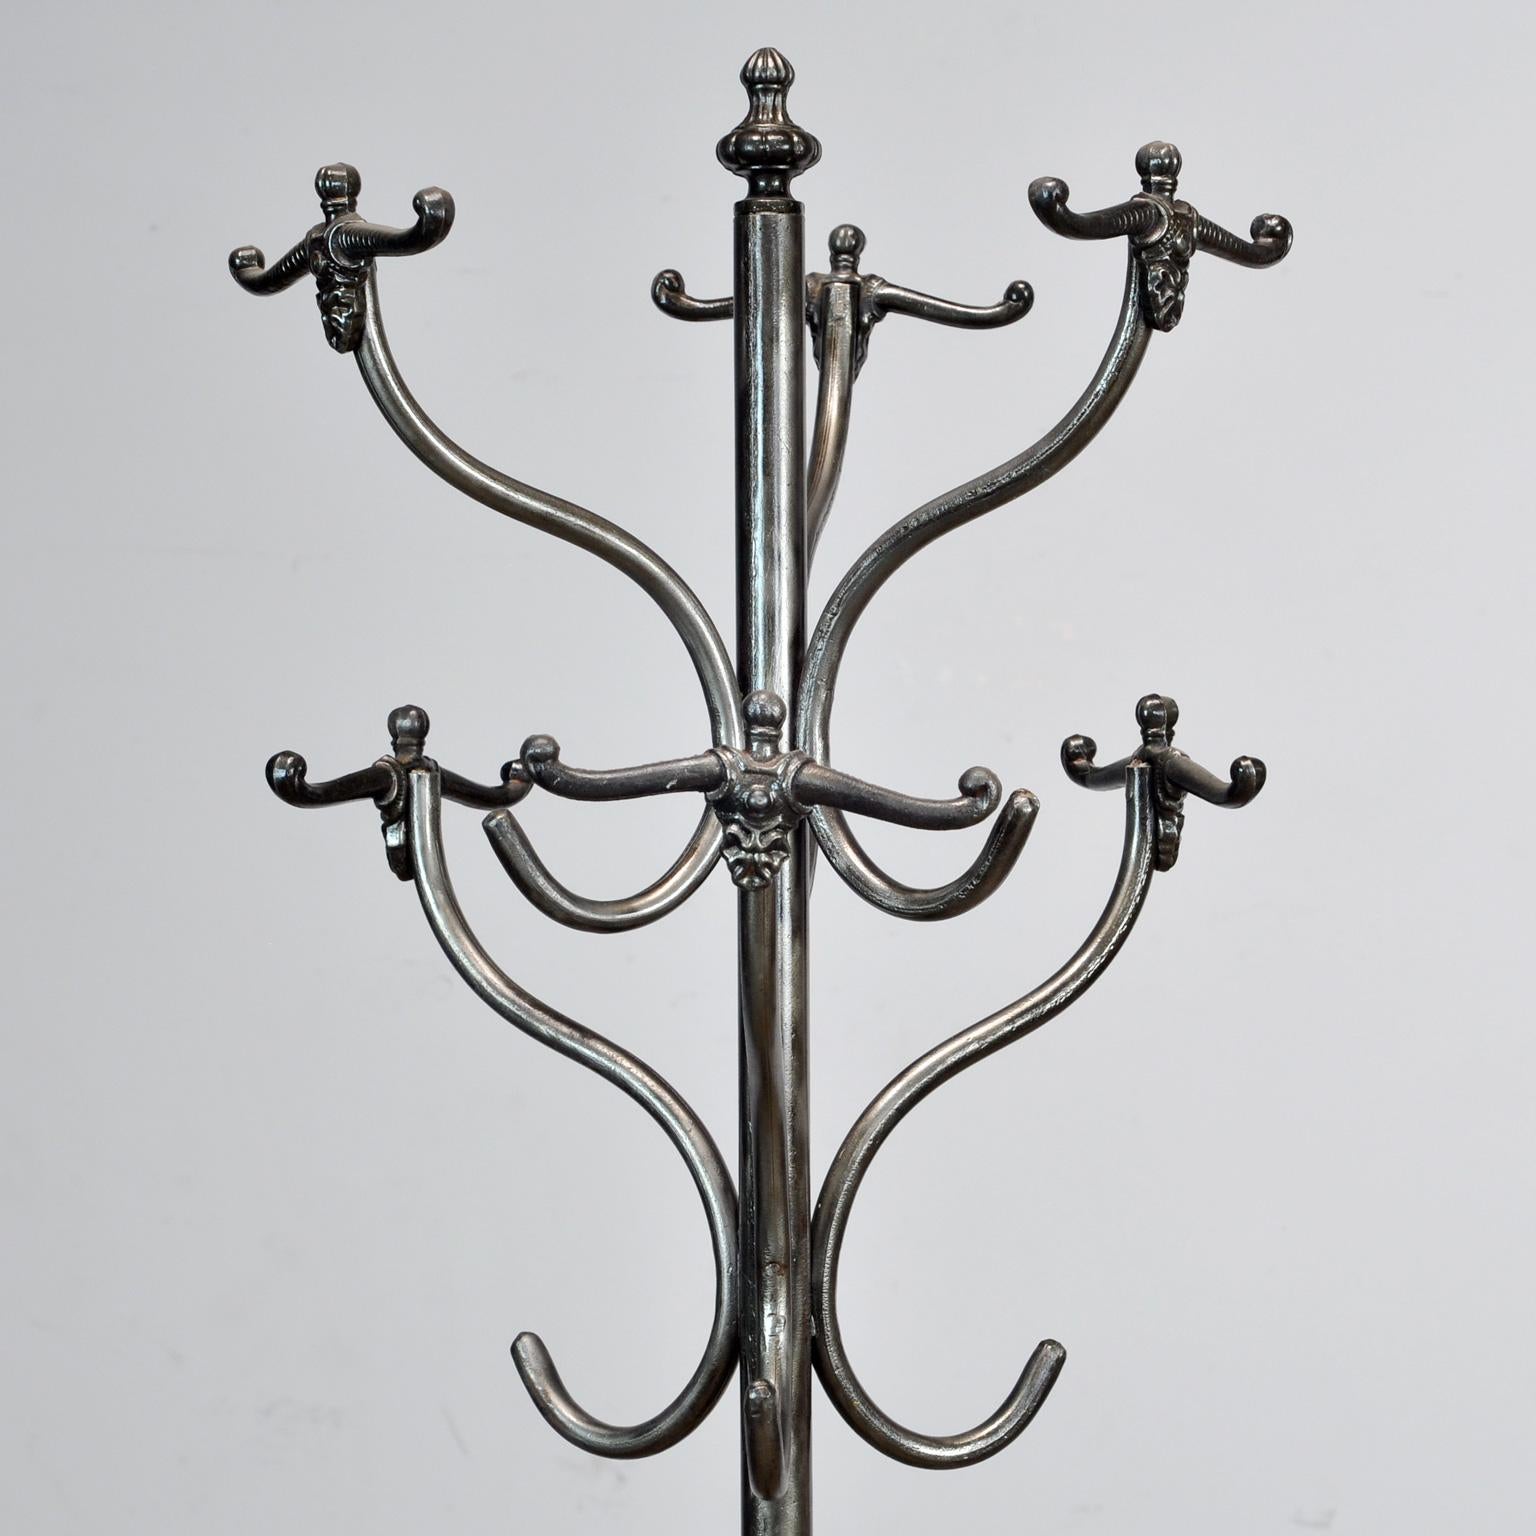 Polished iron coatrack with umbrella stand, circa 1920. With cast iron clothing hooks. Very nice condition.